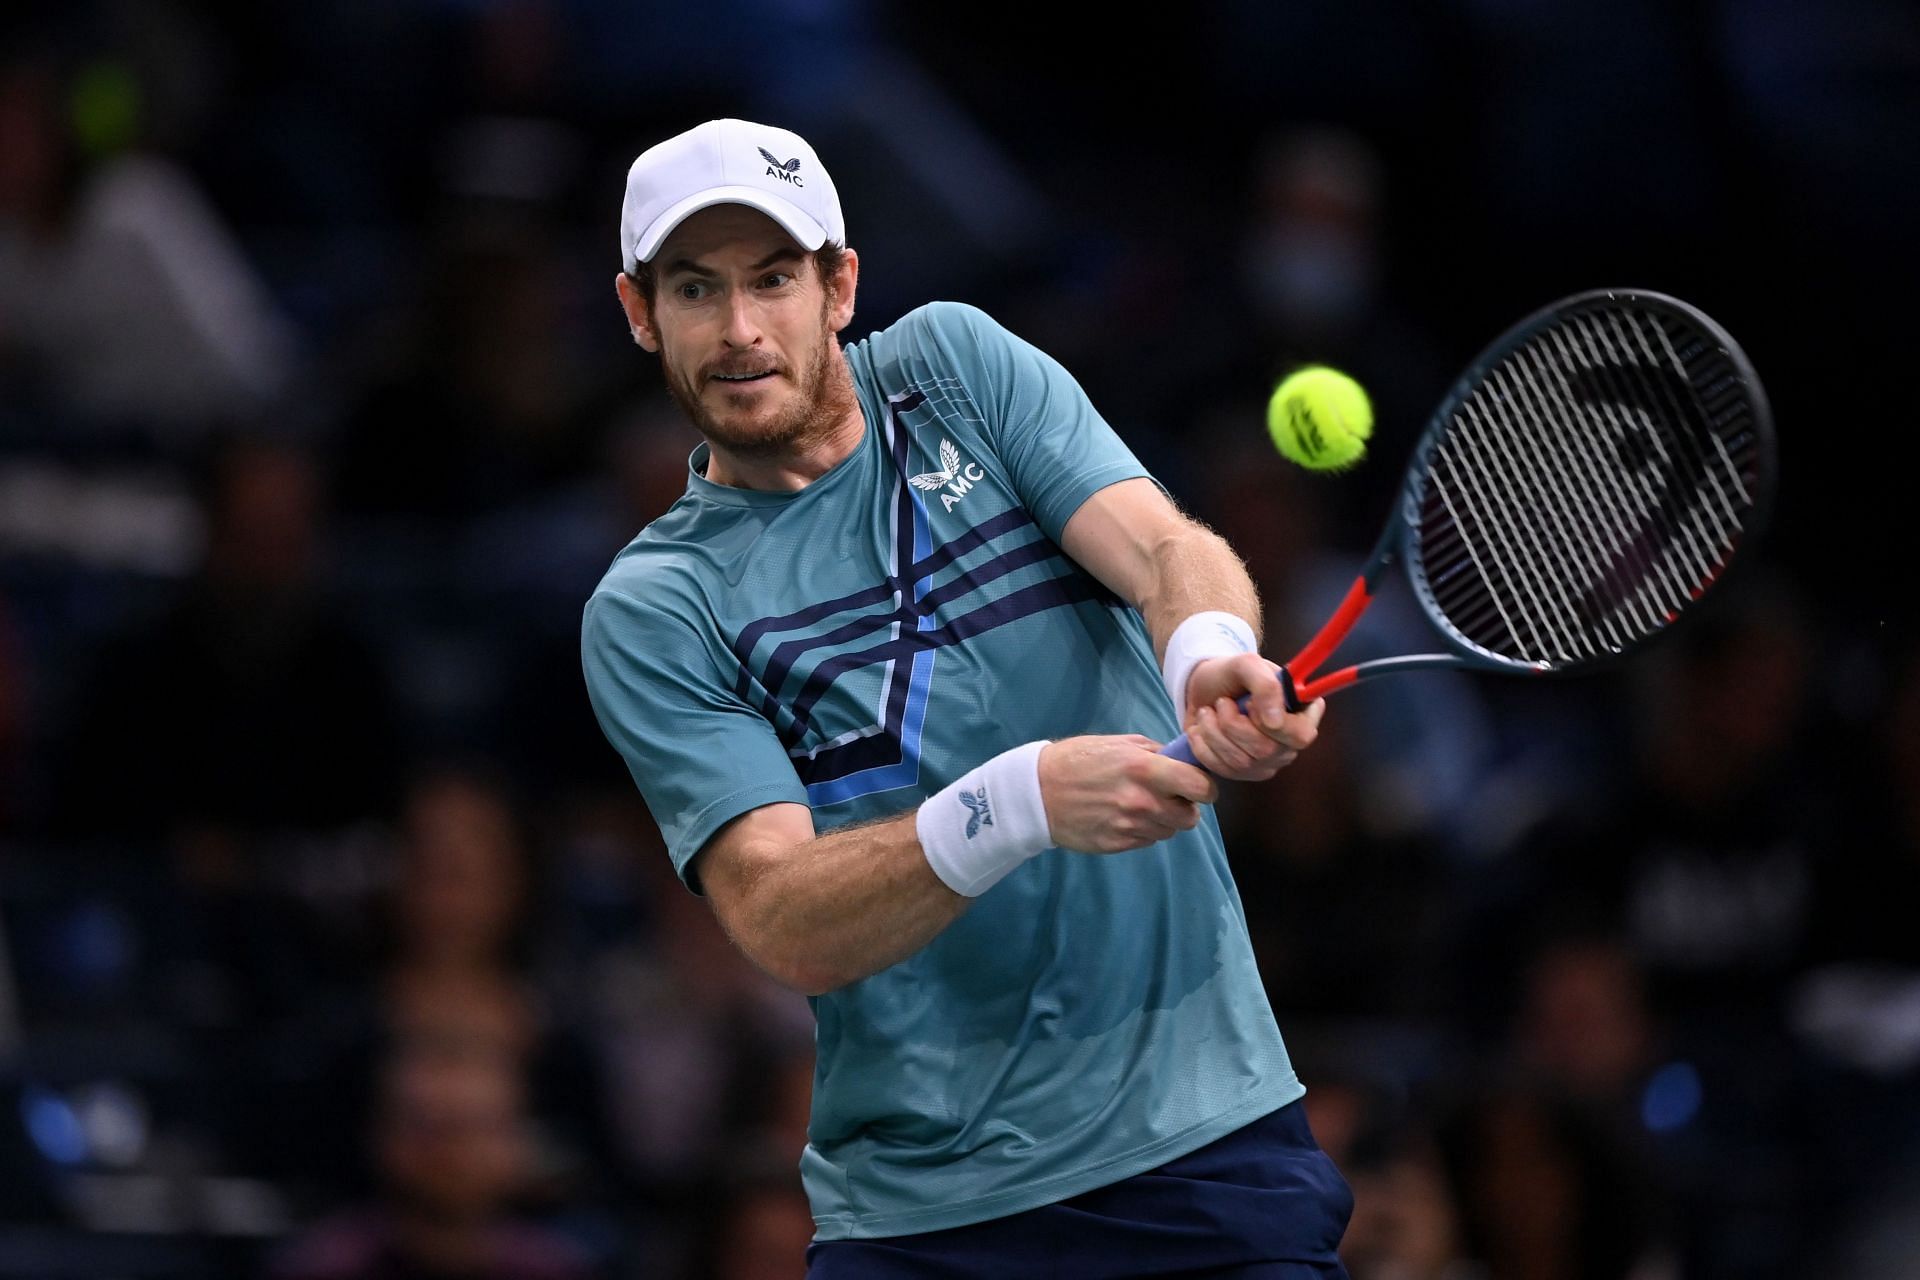 Murray produced some promising performances in Abu Dhabi